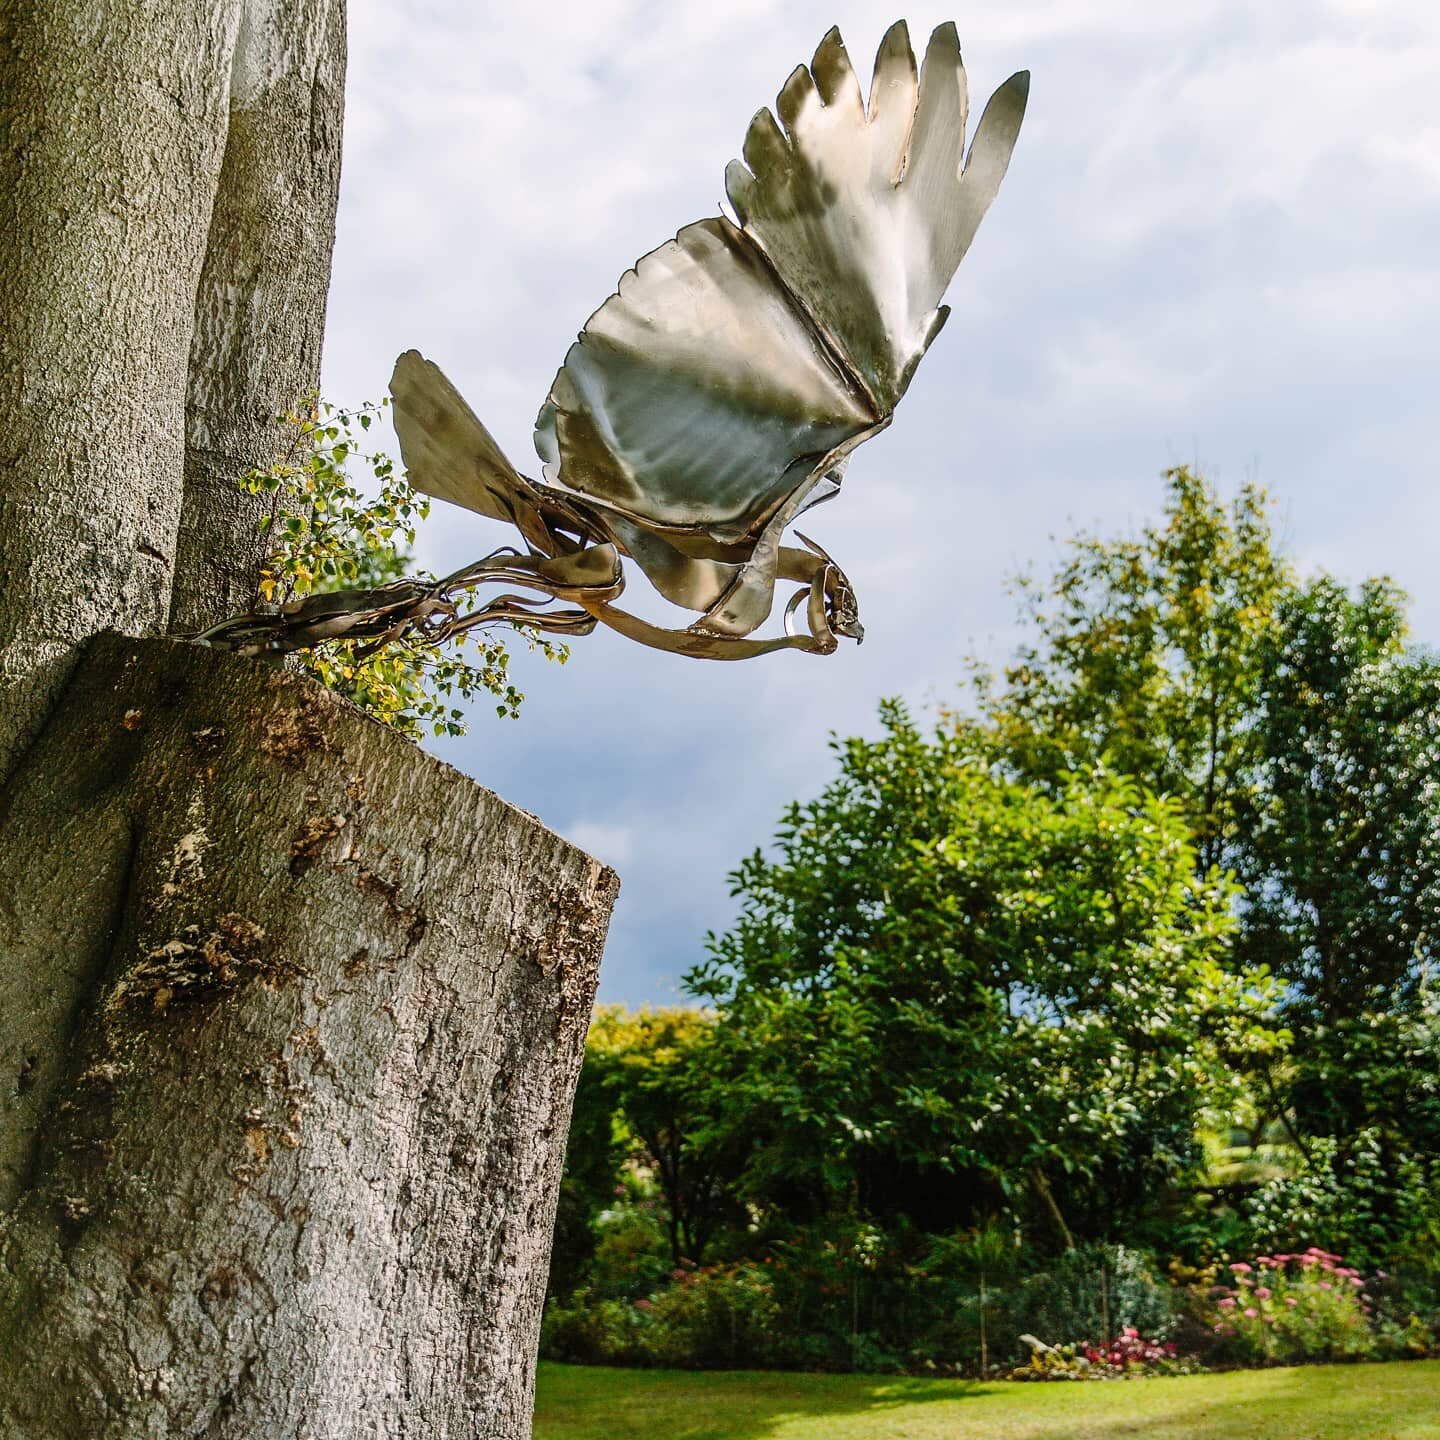 This tree had to be trimmed thereby creating a natural plinth for an eagle owl
#gardensculpture #gardendesigner #gardenart #gardendesign #landscapedesign #landscapearchitect #birdsculpture #owl #owlsculpture #birdsculpture #rspb #owlart #commissioned